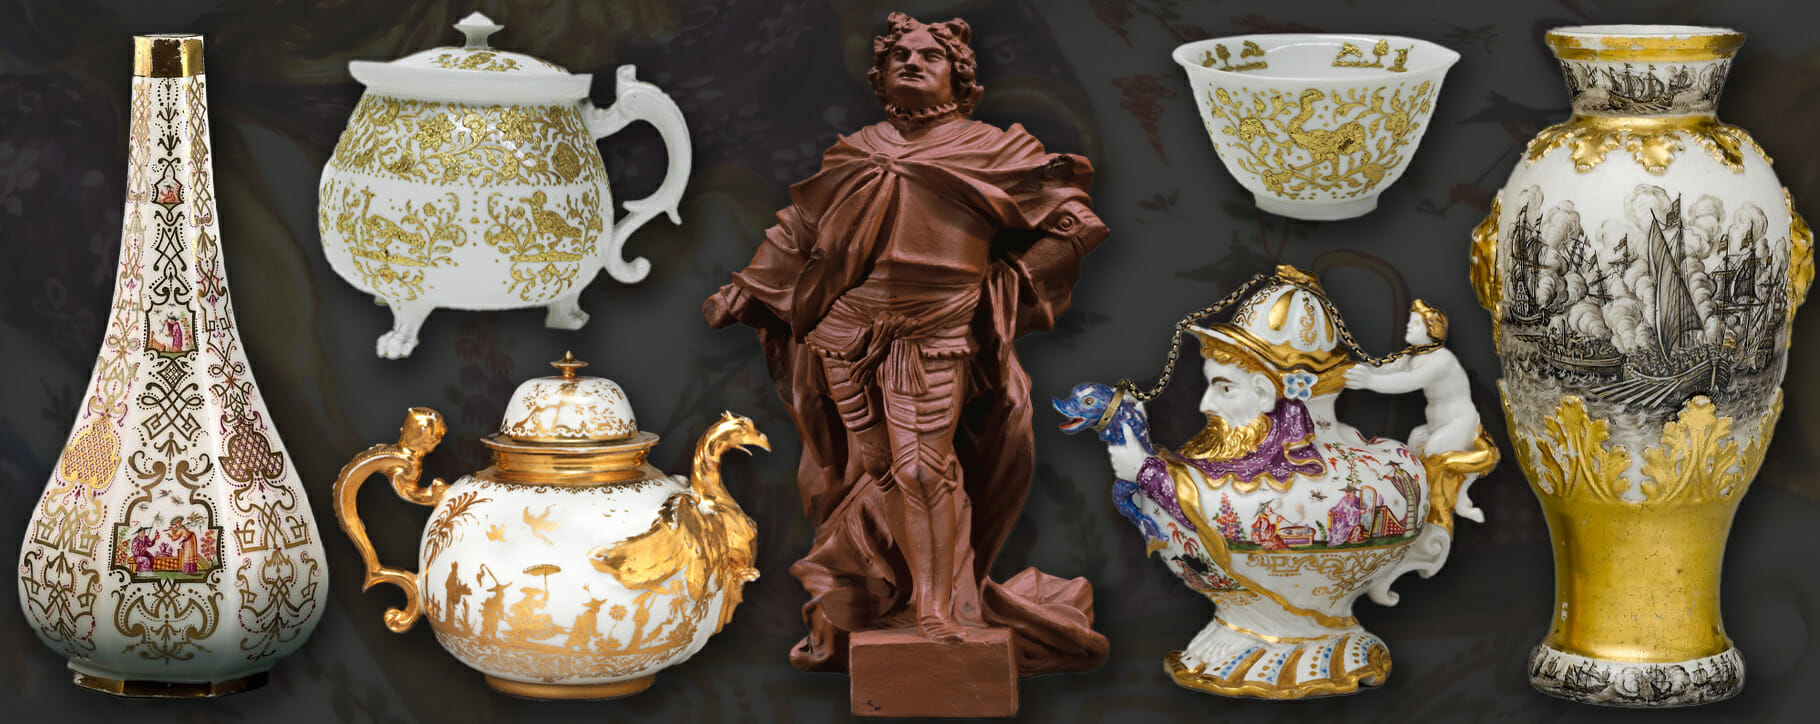 Early Meissen examples